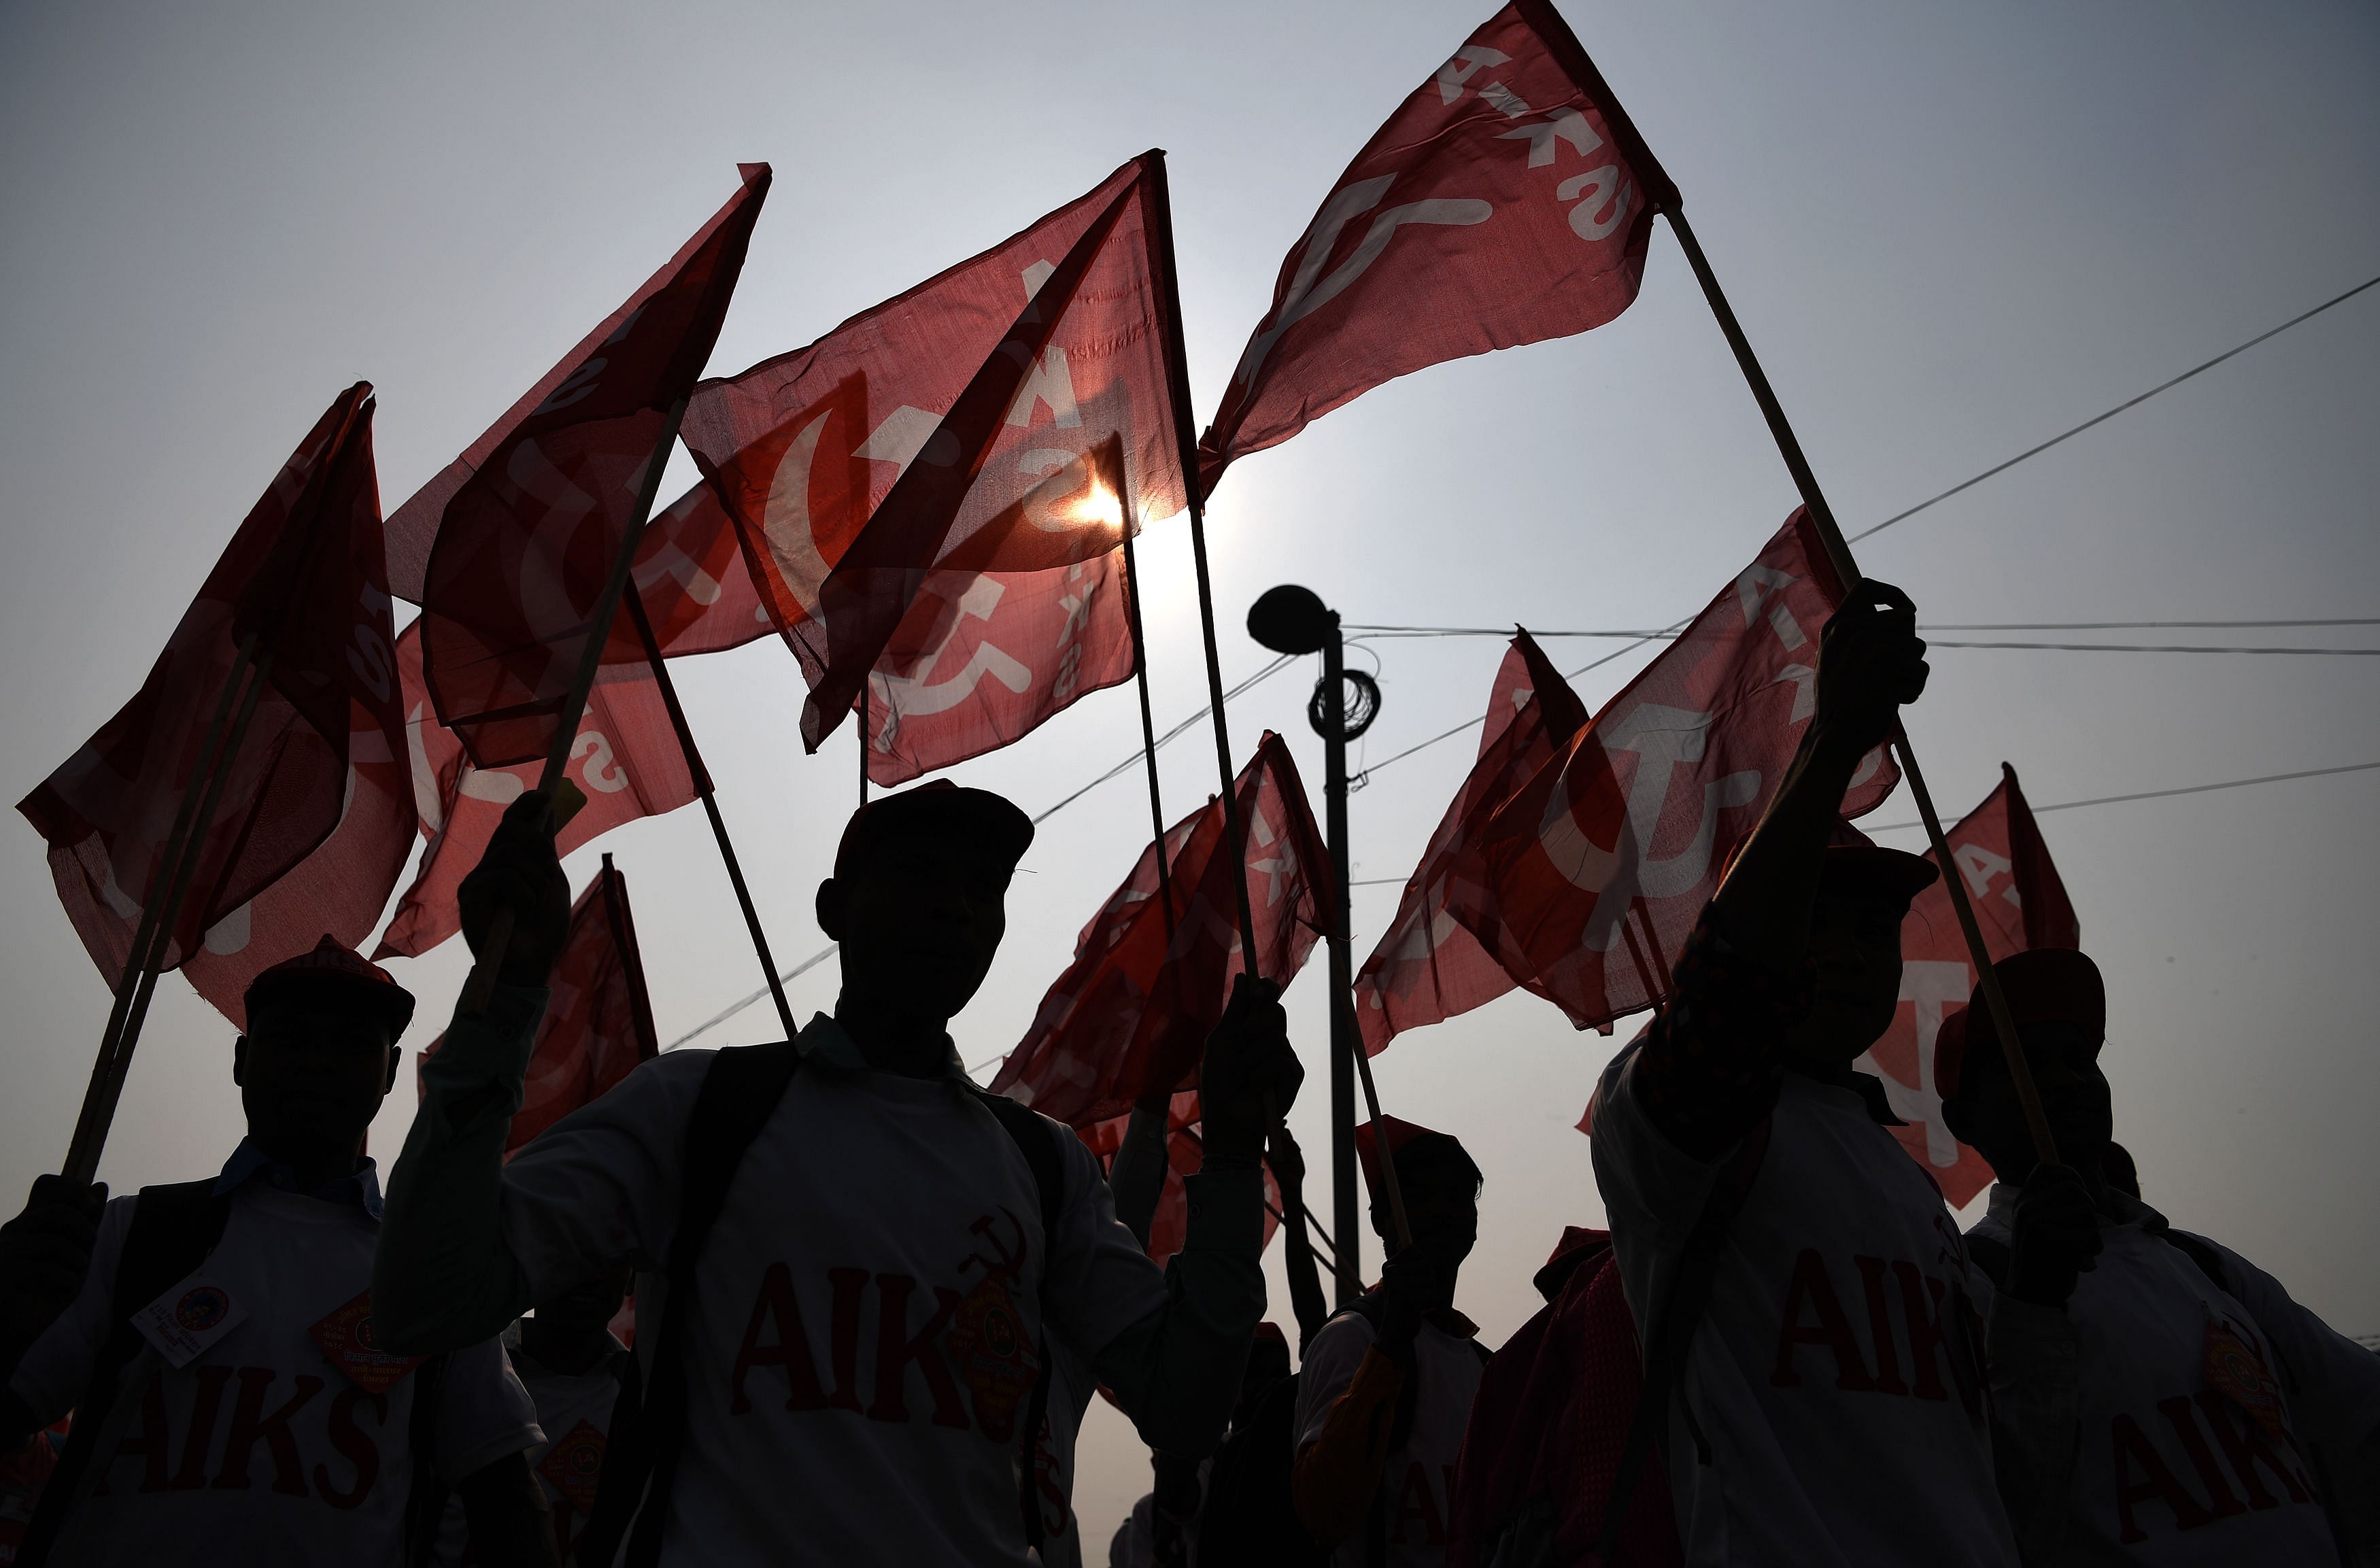  Indian farmers take part in a march organised by the All India Kisan Sabha (AIKS) organization and Communist Party of India (Marxist) alongwith other leftist groups. (AFP photo)